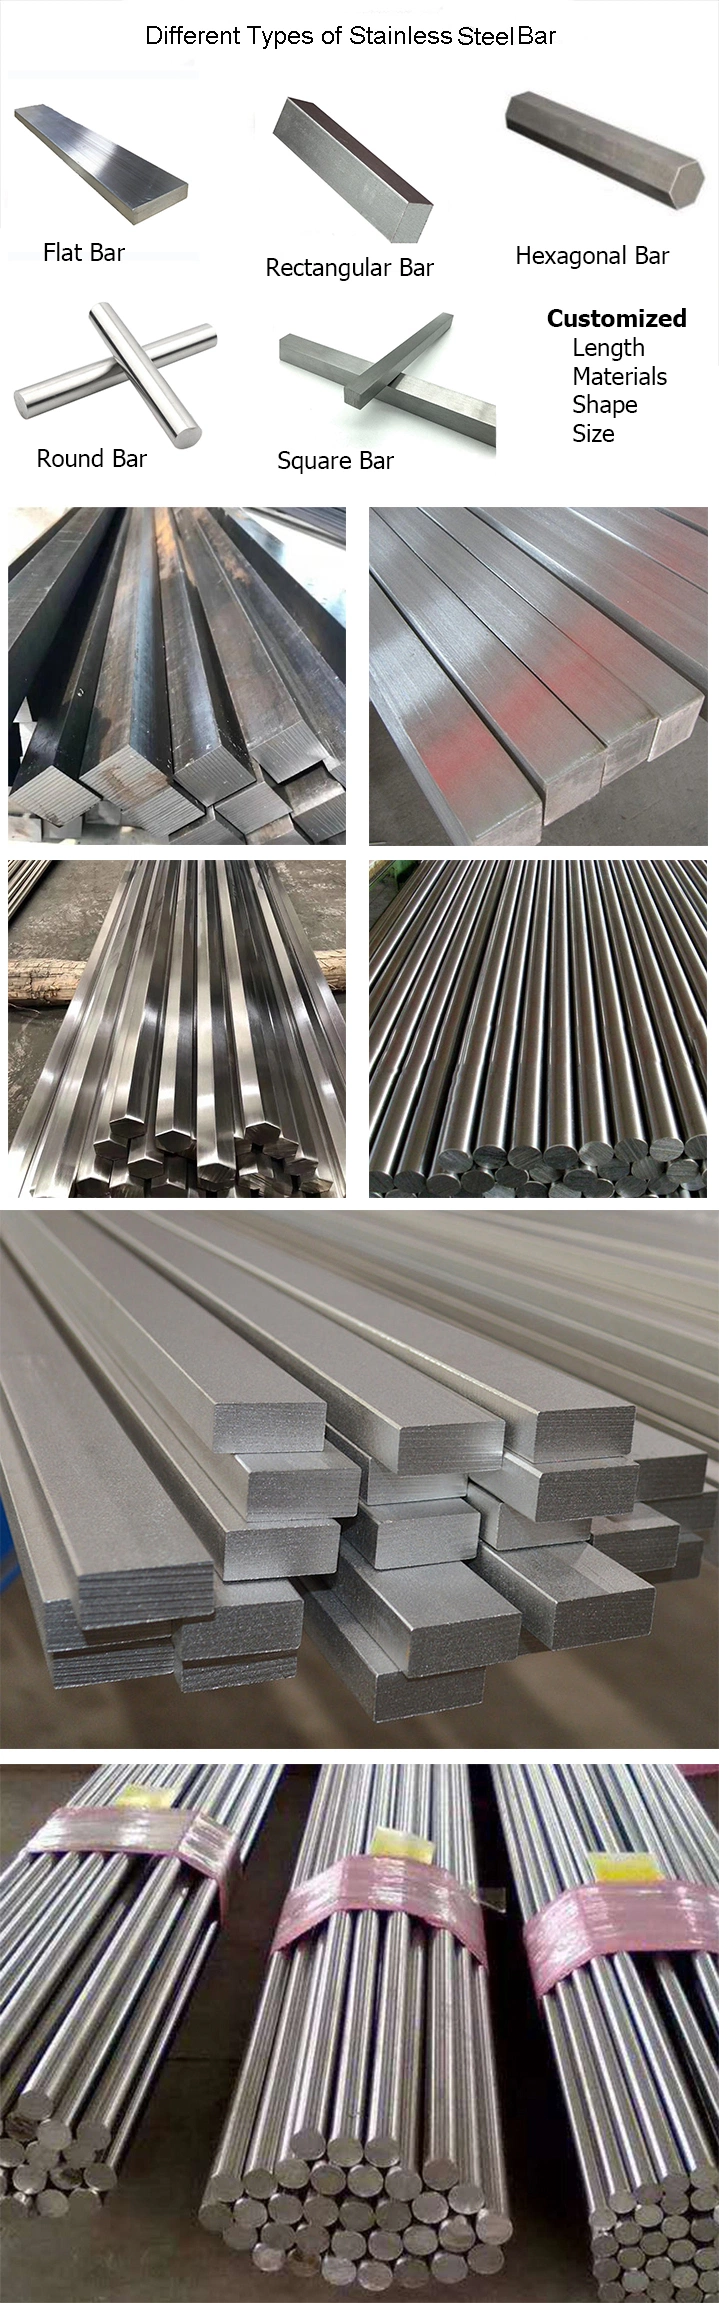 Liange Stainless Steel Round Bar Grade Ss310 SS316 SS304 for Sale